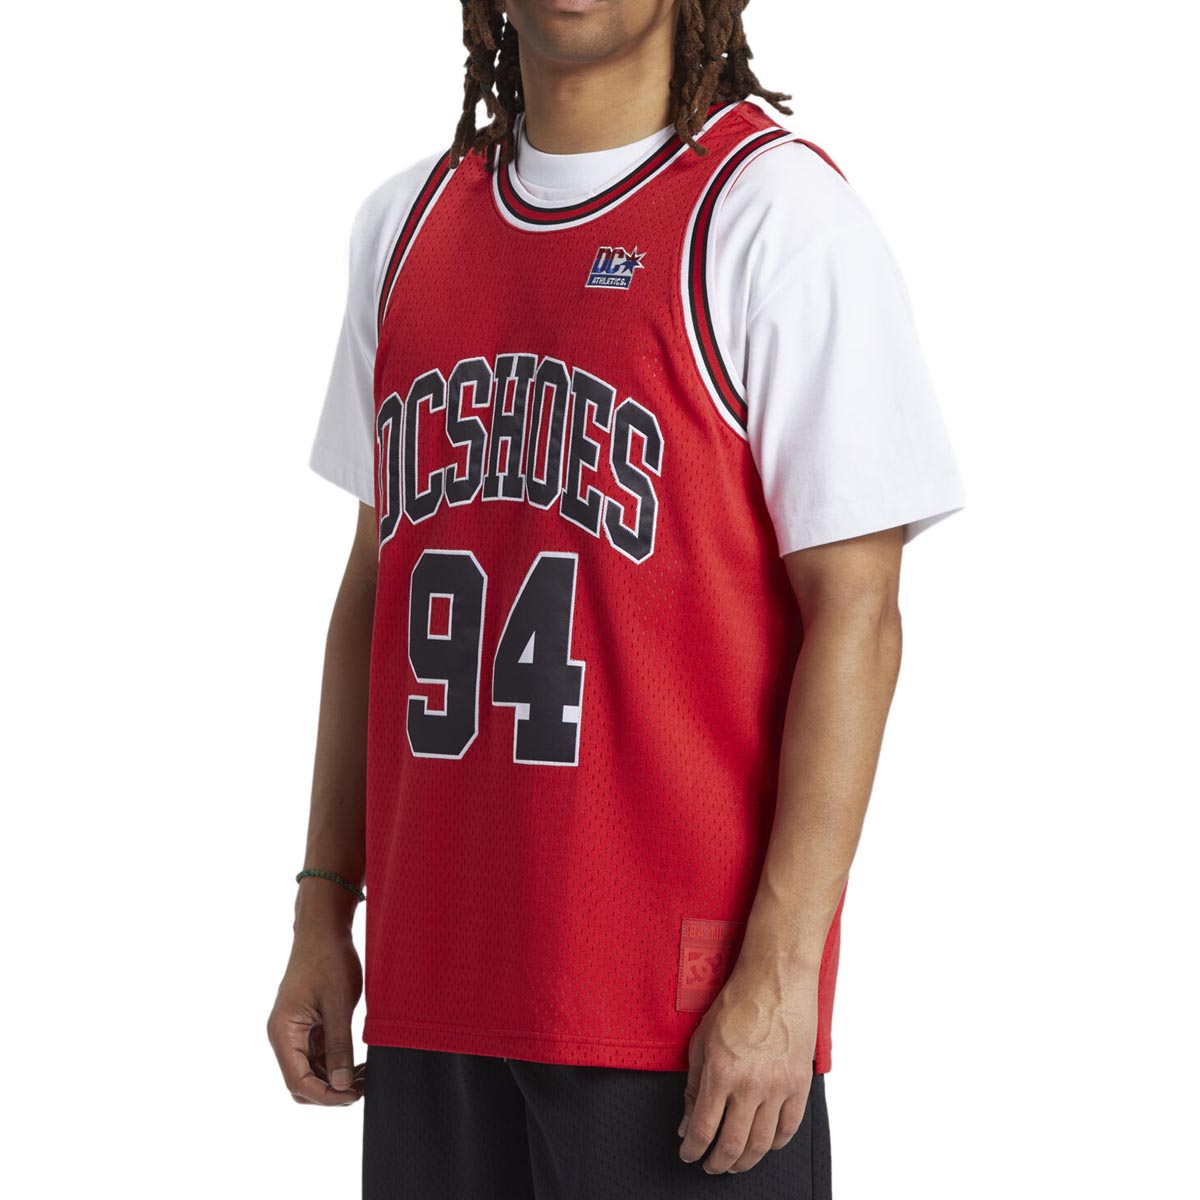 DC Chi Town Jersey - Racing Red image 3